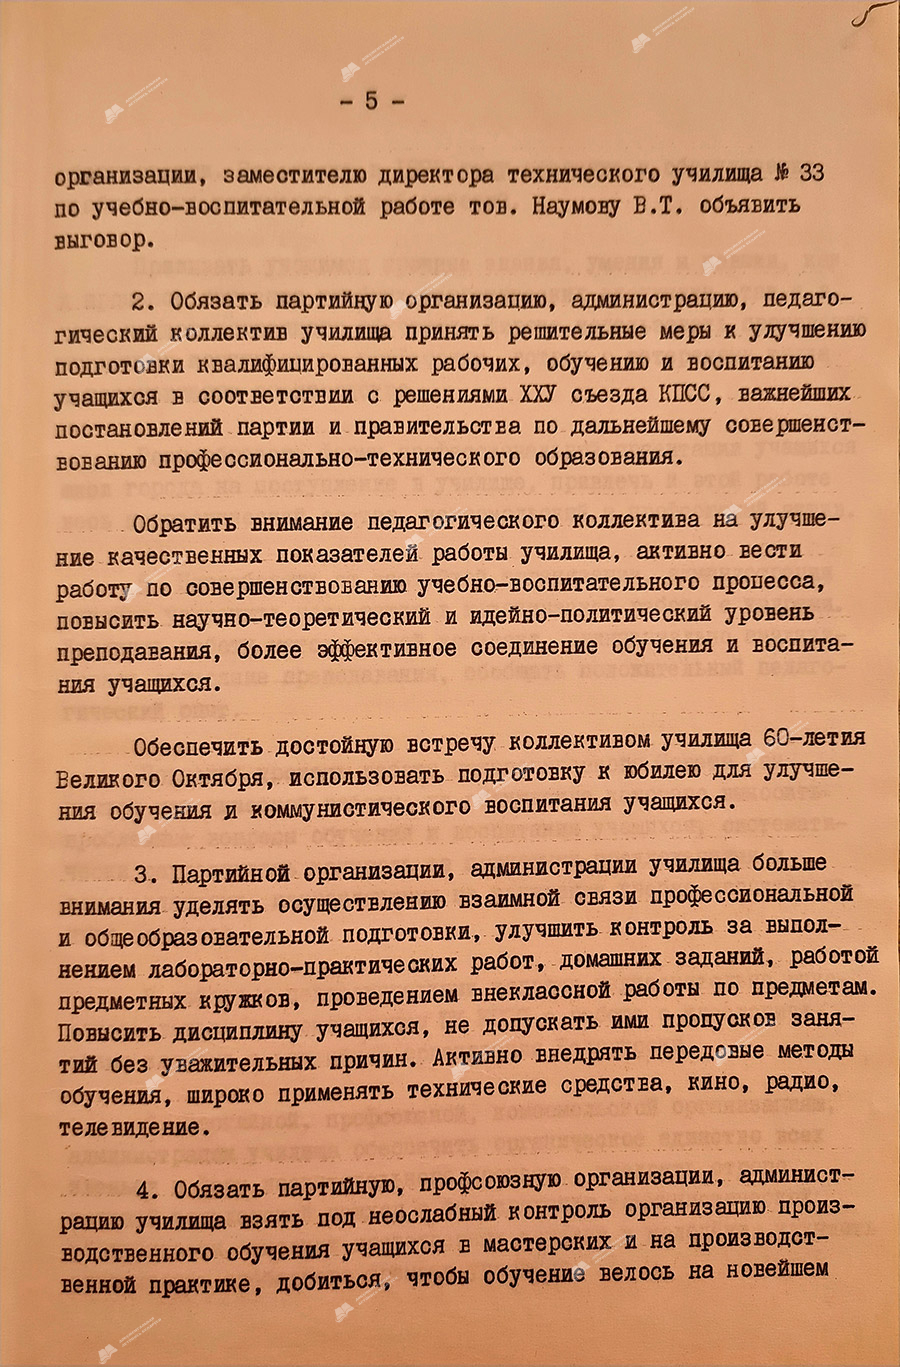 From the protocol No. 19 of the meeting of the bureau of the Mogilev city committee of the Communist Party of Belarus «On the work of the party organization and the administration of technical school No. 33 of metal workers to improve the quality of training and education of skilled workers for the national economy in the light of the requirements of the 25th Congress of the CPSU»-стр. 4